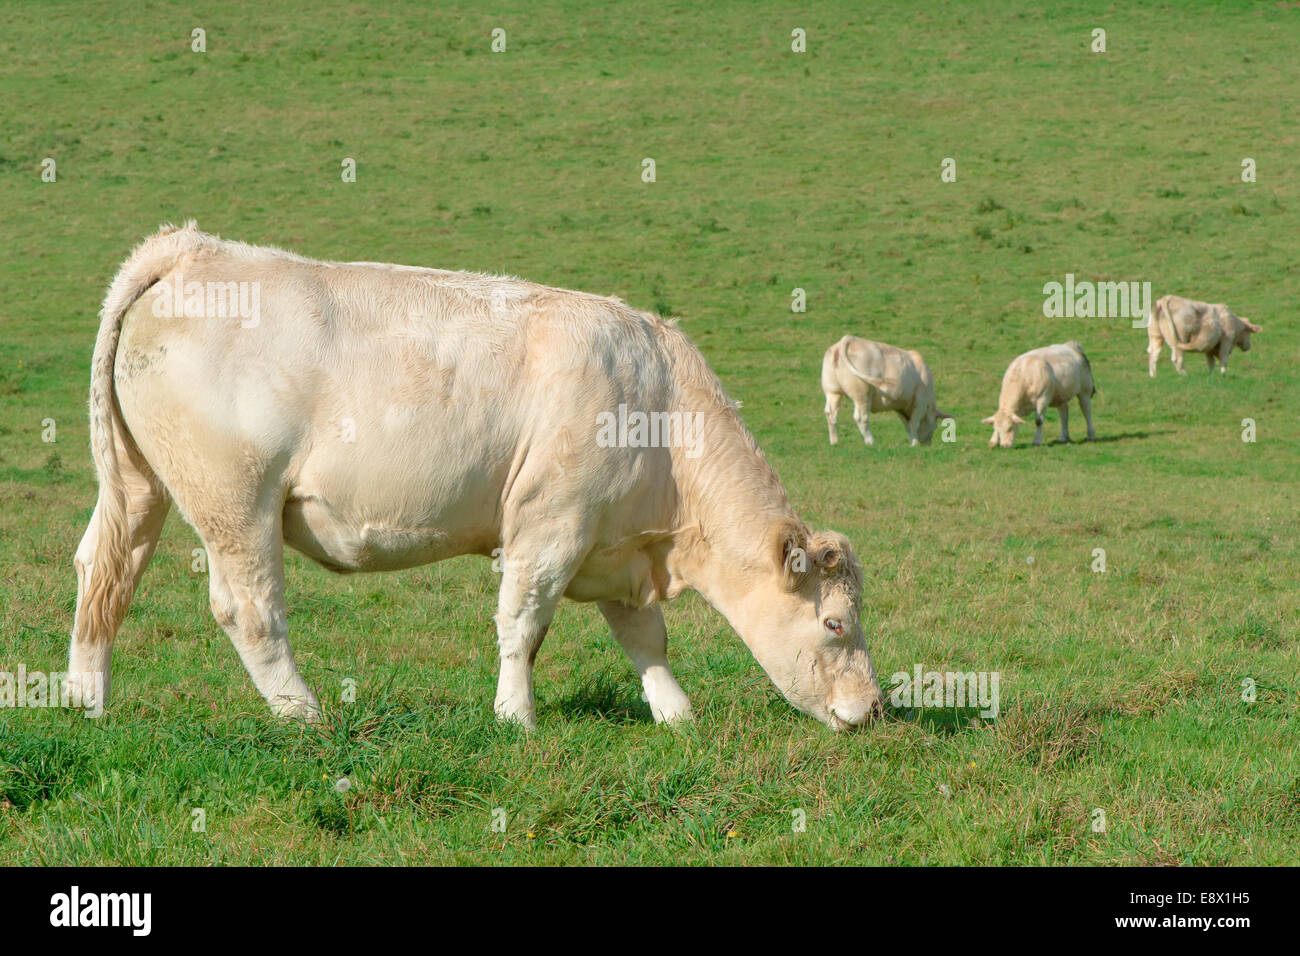 white cows eating green grass in a field Stock Photo